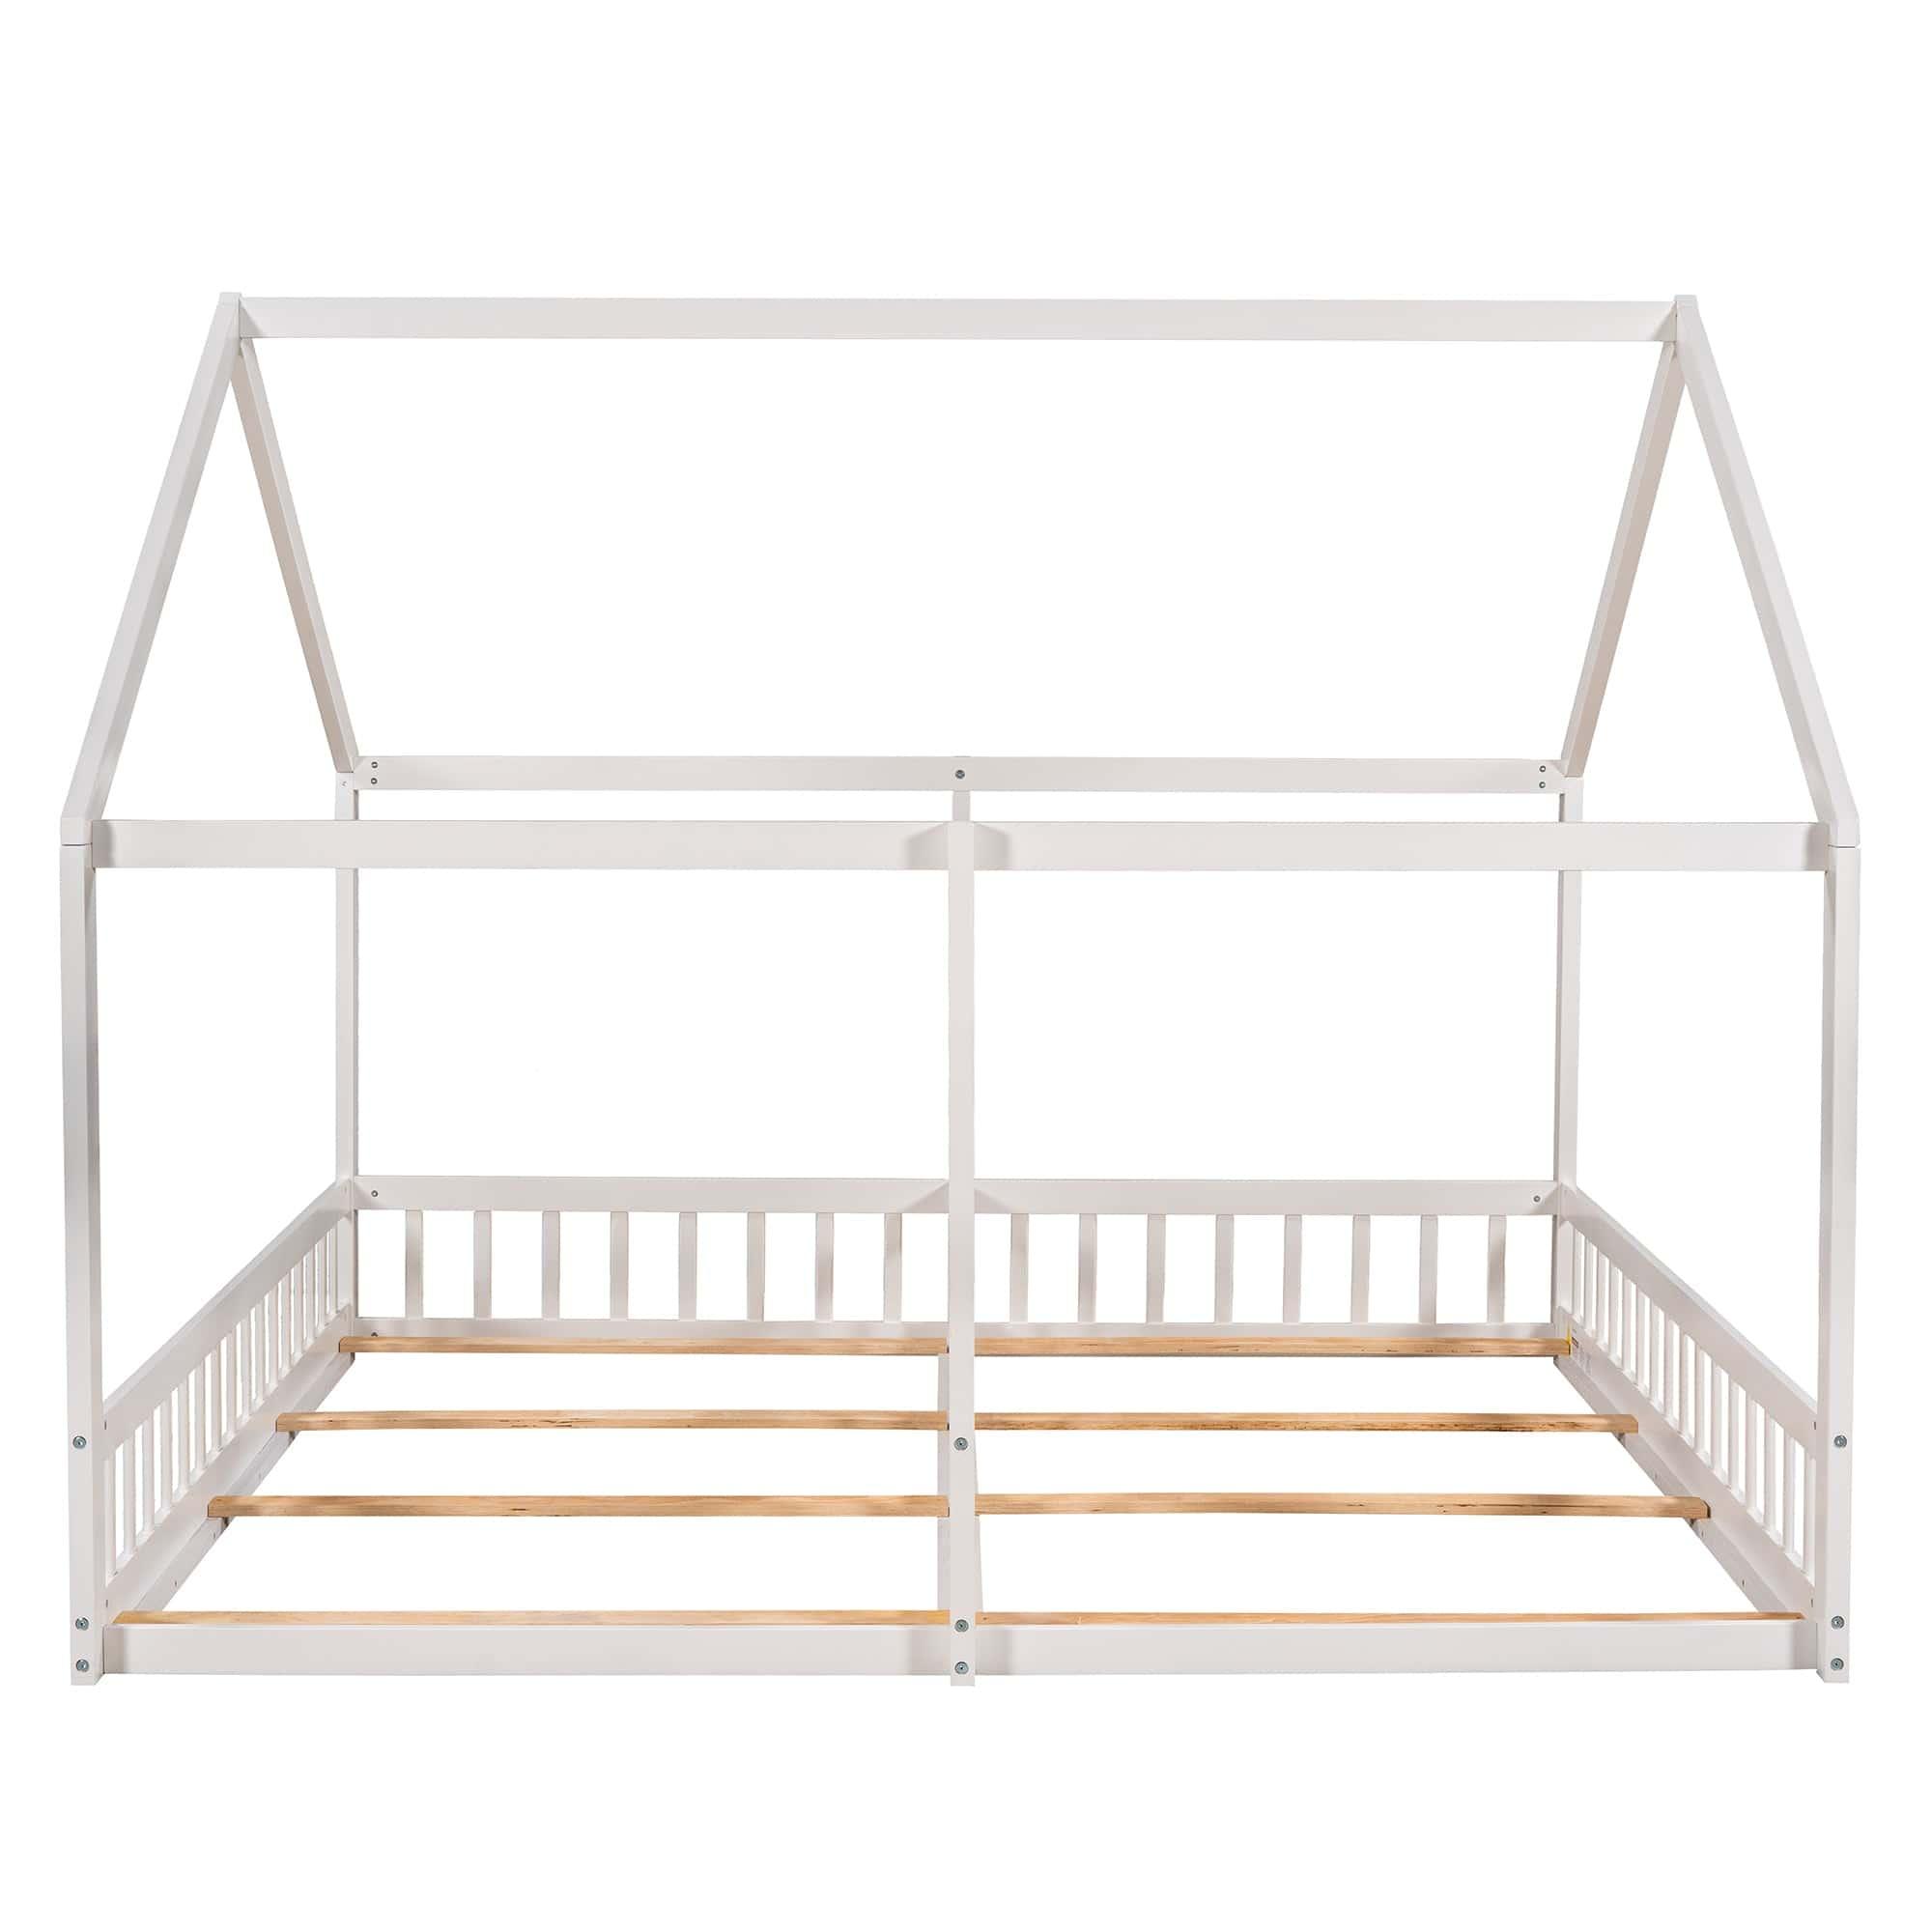 Shop Twin Size House Platform Beds,Two Shared Beds, White Mademoiselle Home Decor